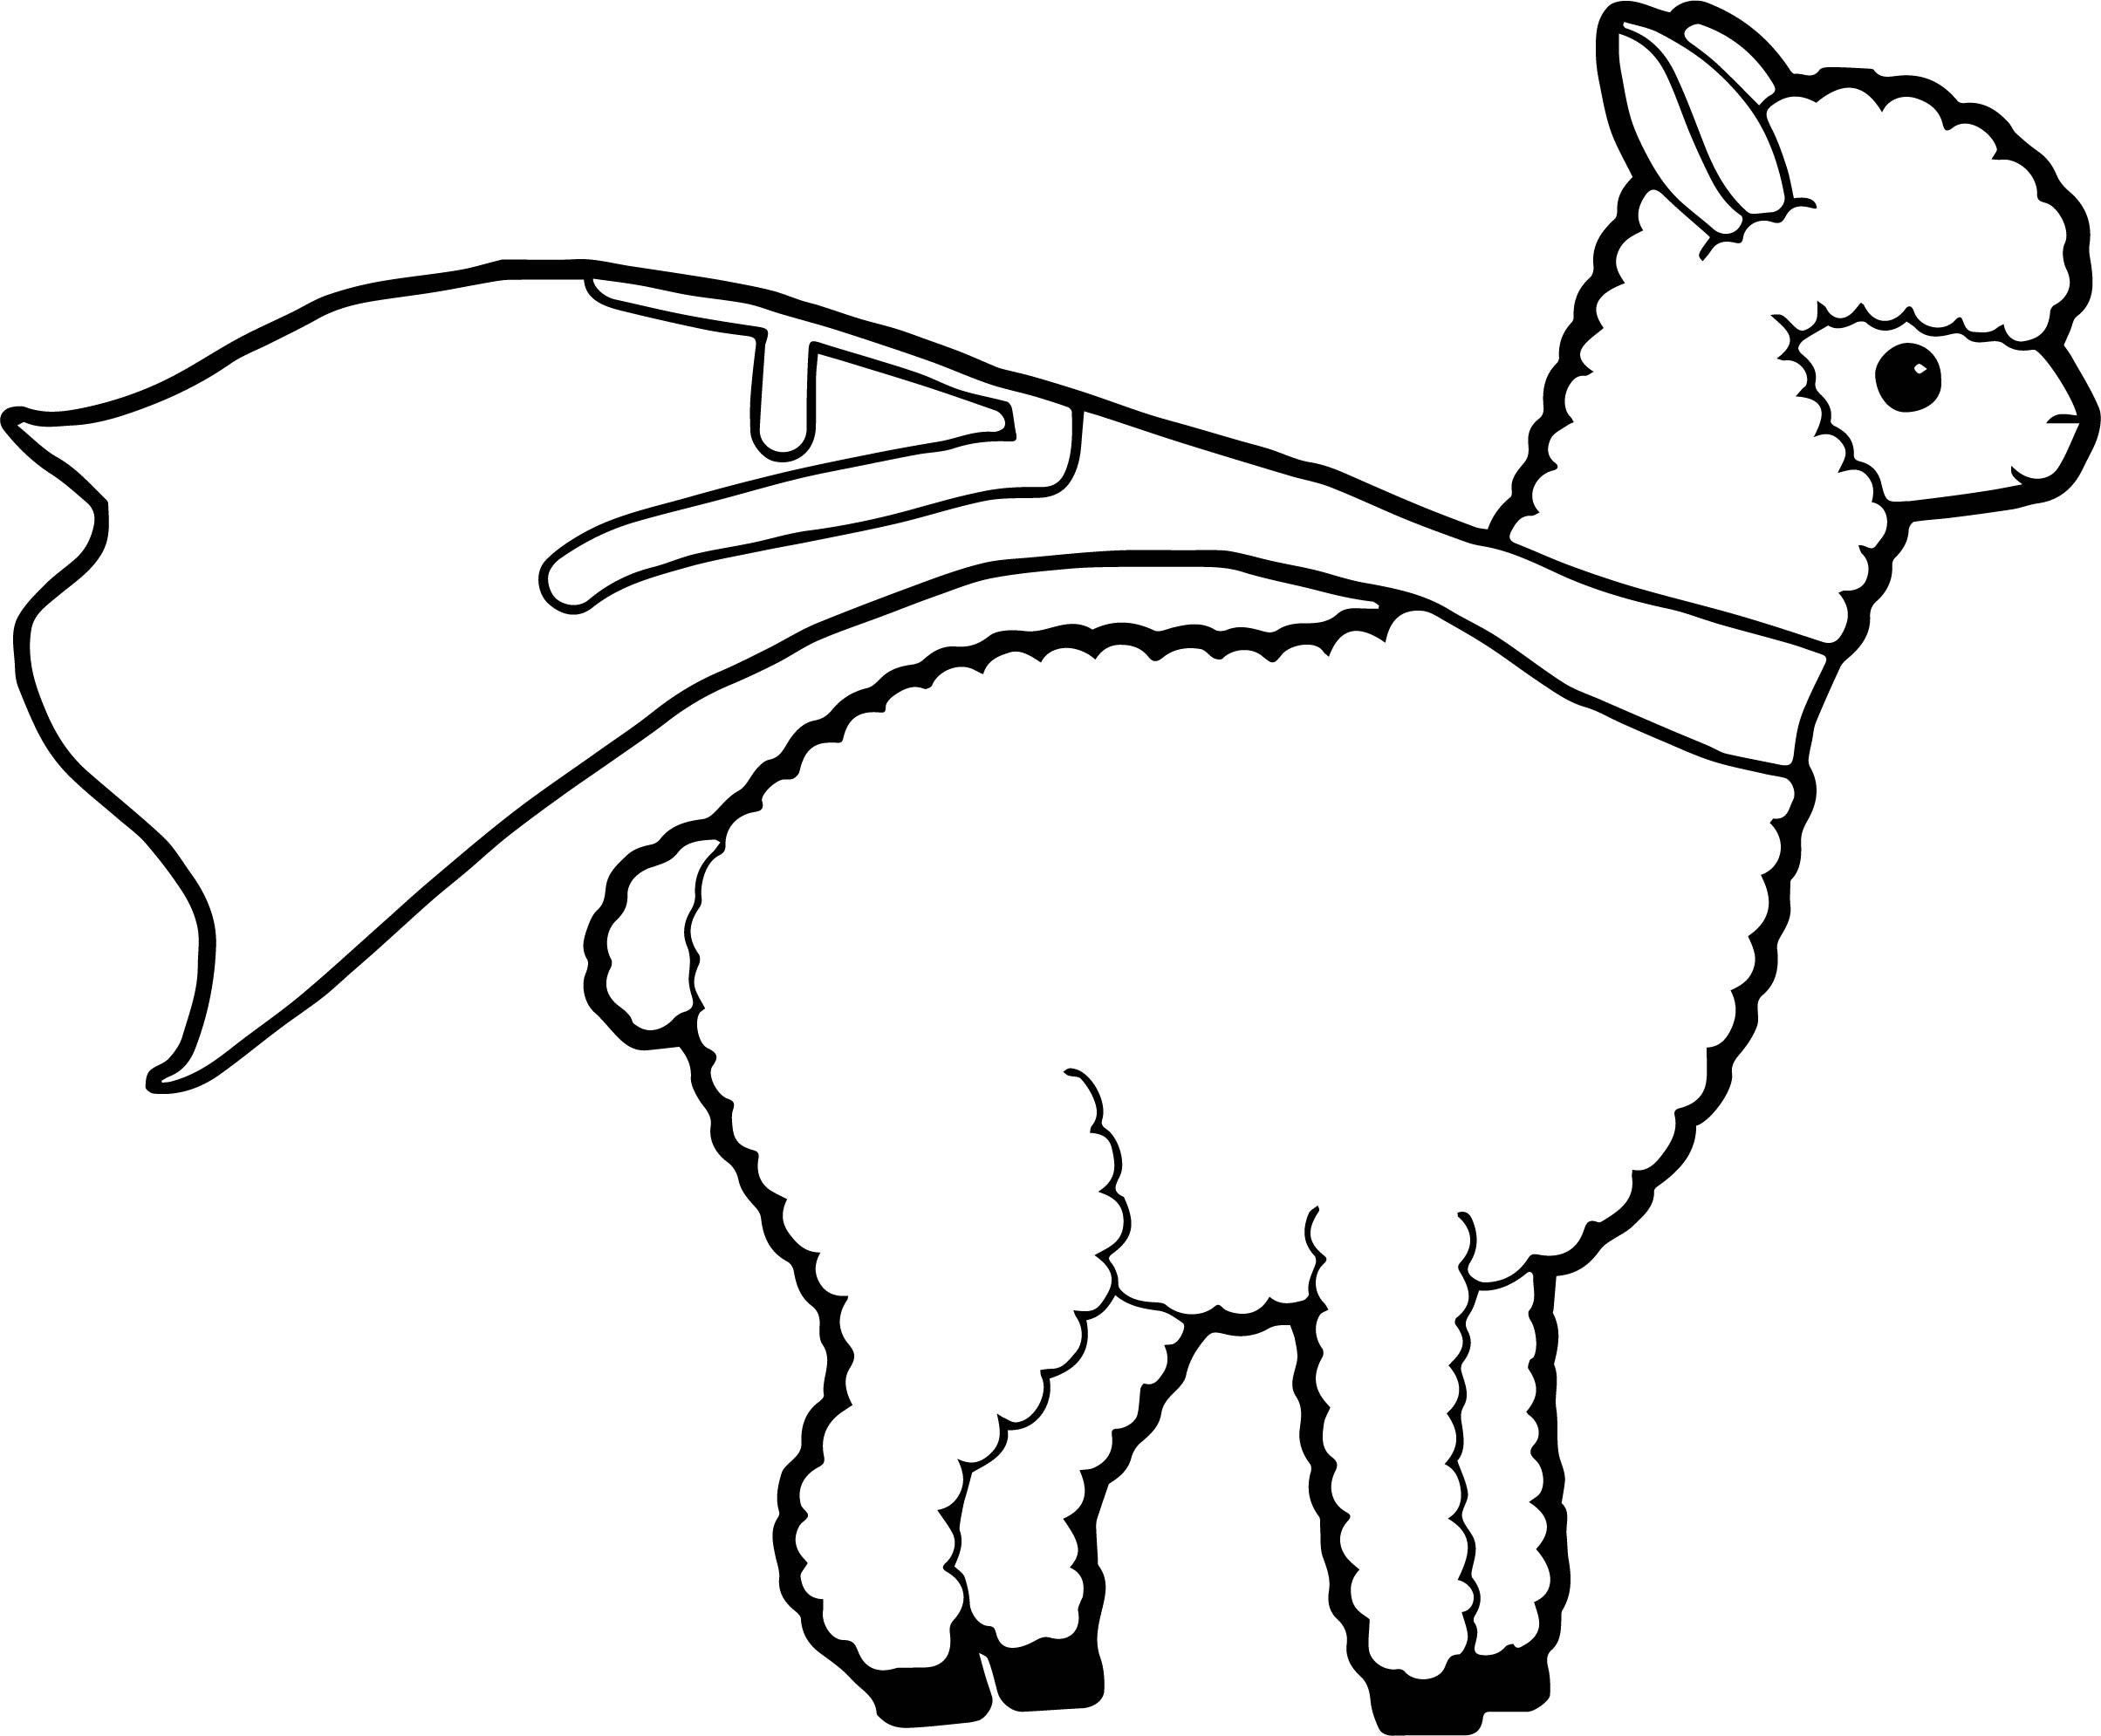 Lama Coloring Pages   Coloring Home